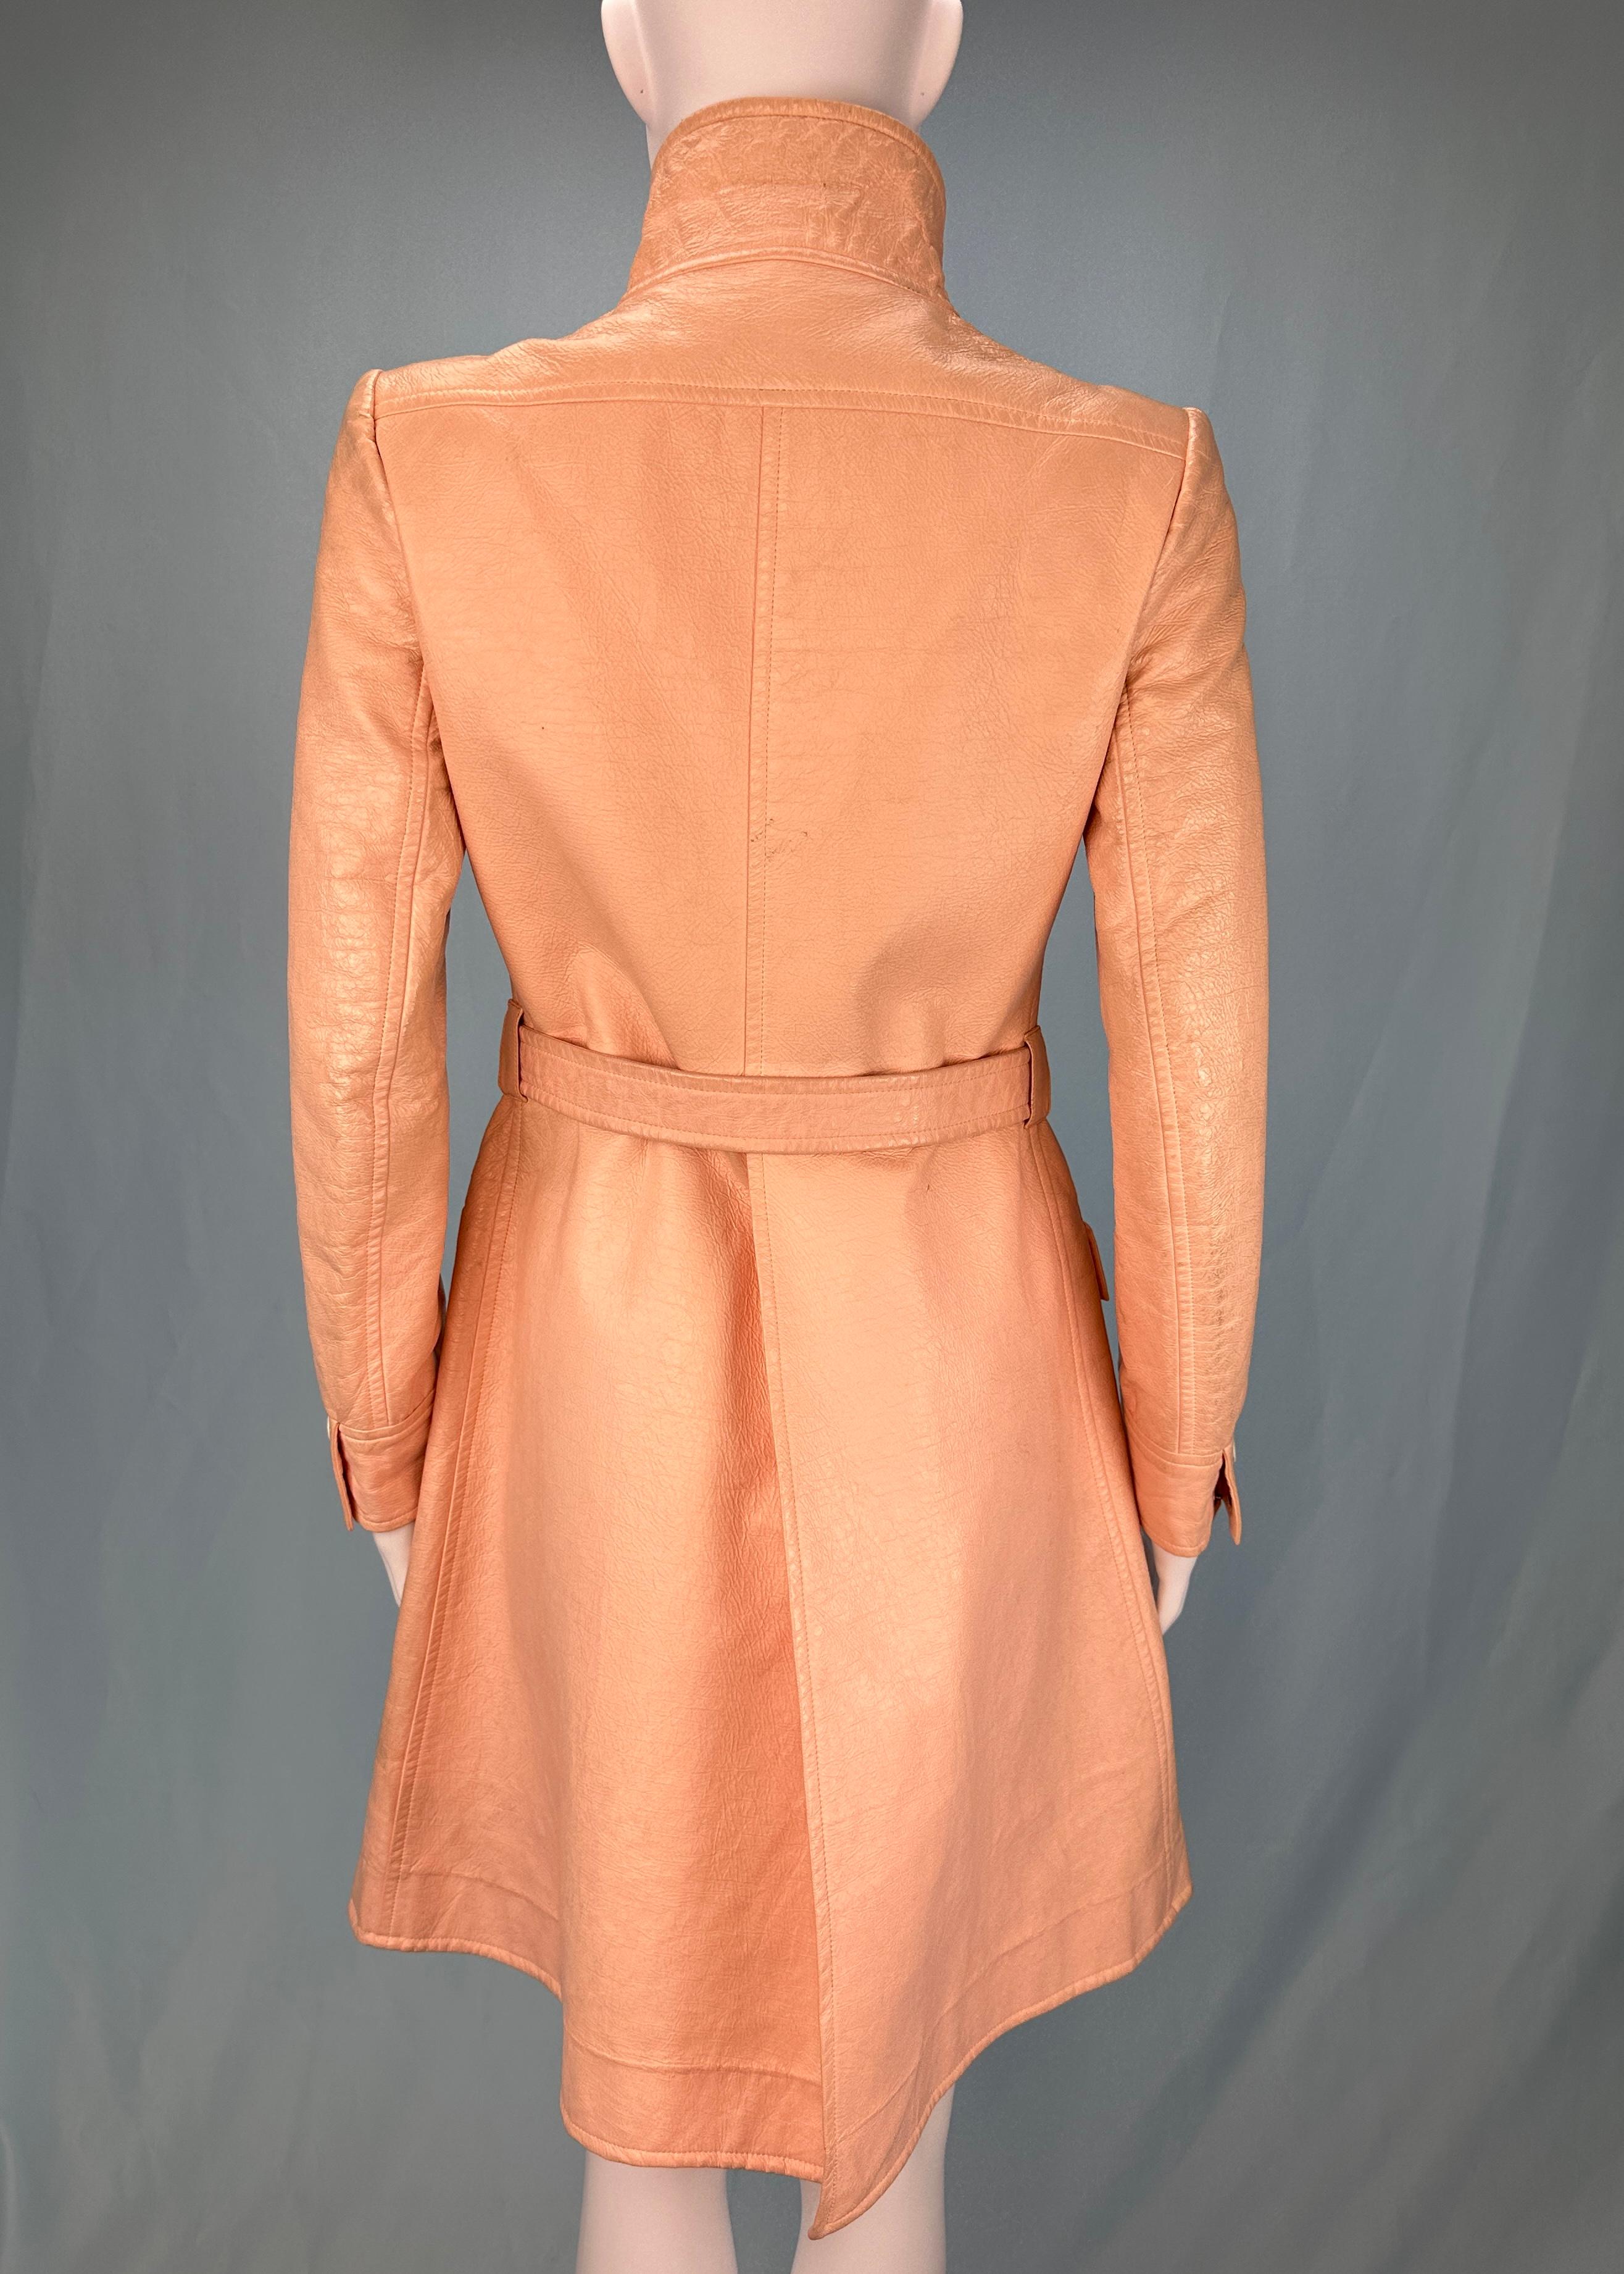 Women's Courrèges 1960’s Nylon Pink Peach Trench Jacket For Sale